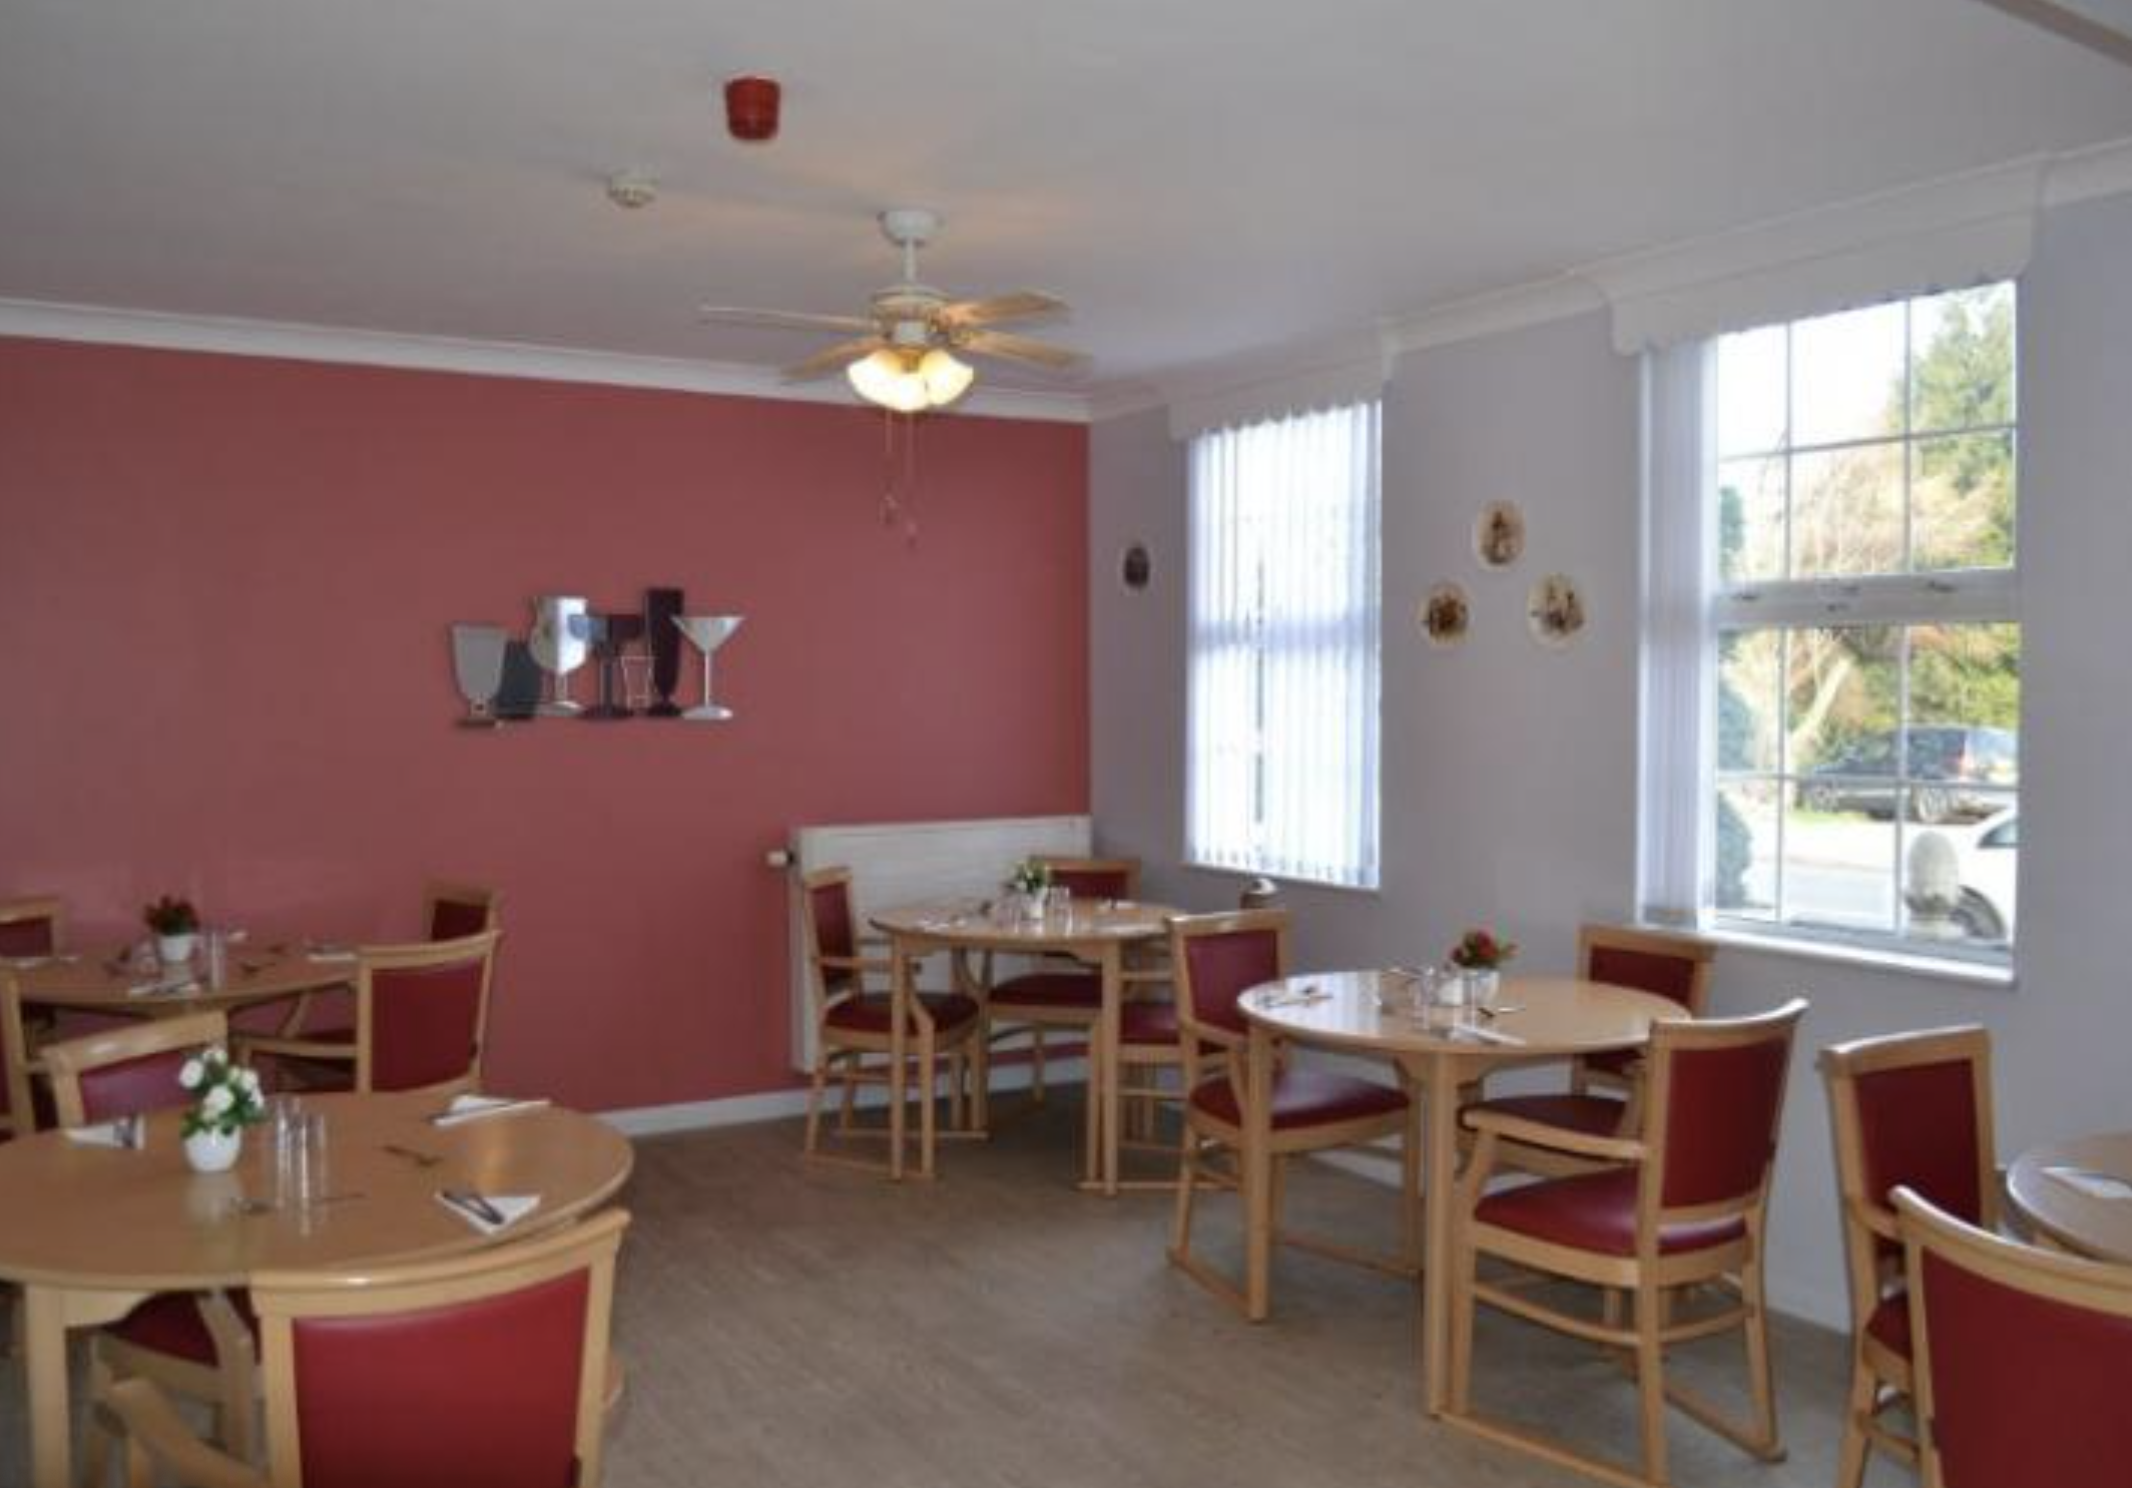 Dining room of Pine Lodge care home in Sittingbourne, Kent